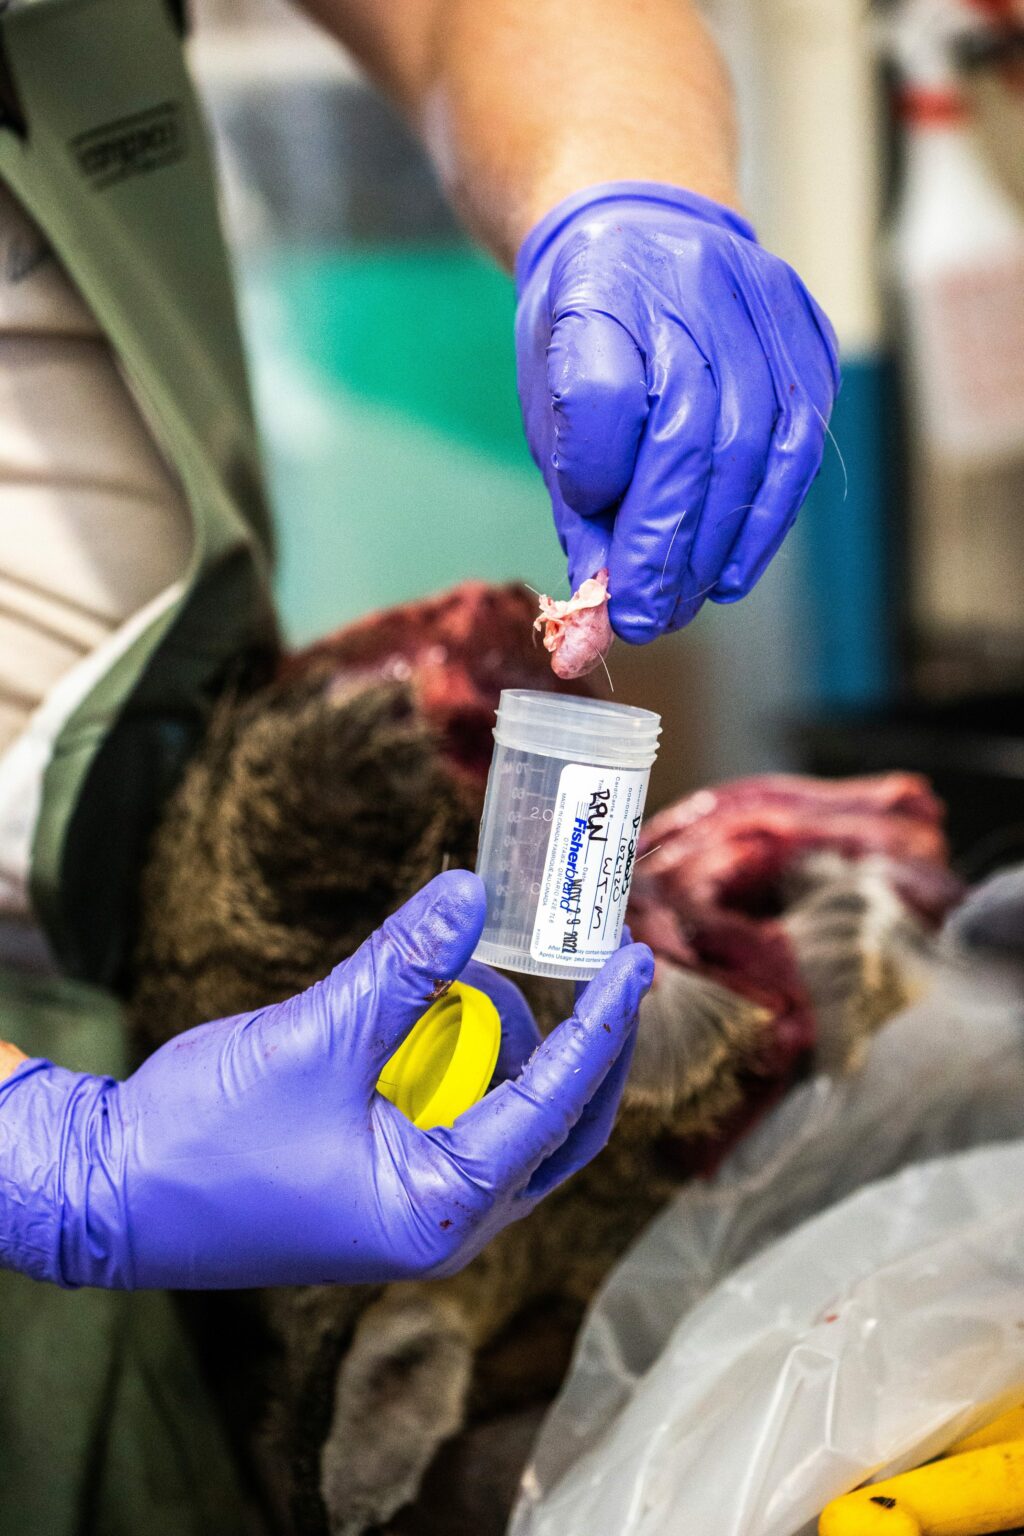 Gloved hands drop lymph nodes from a dissected deer head into a container for sampling at the wildlife health lab in Dauphin, Manitoba